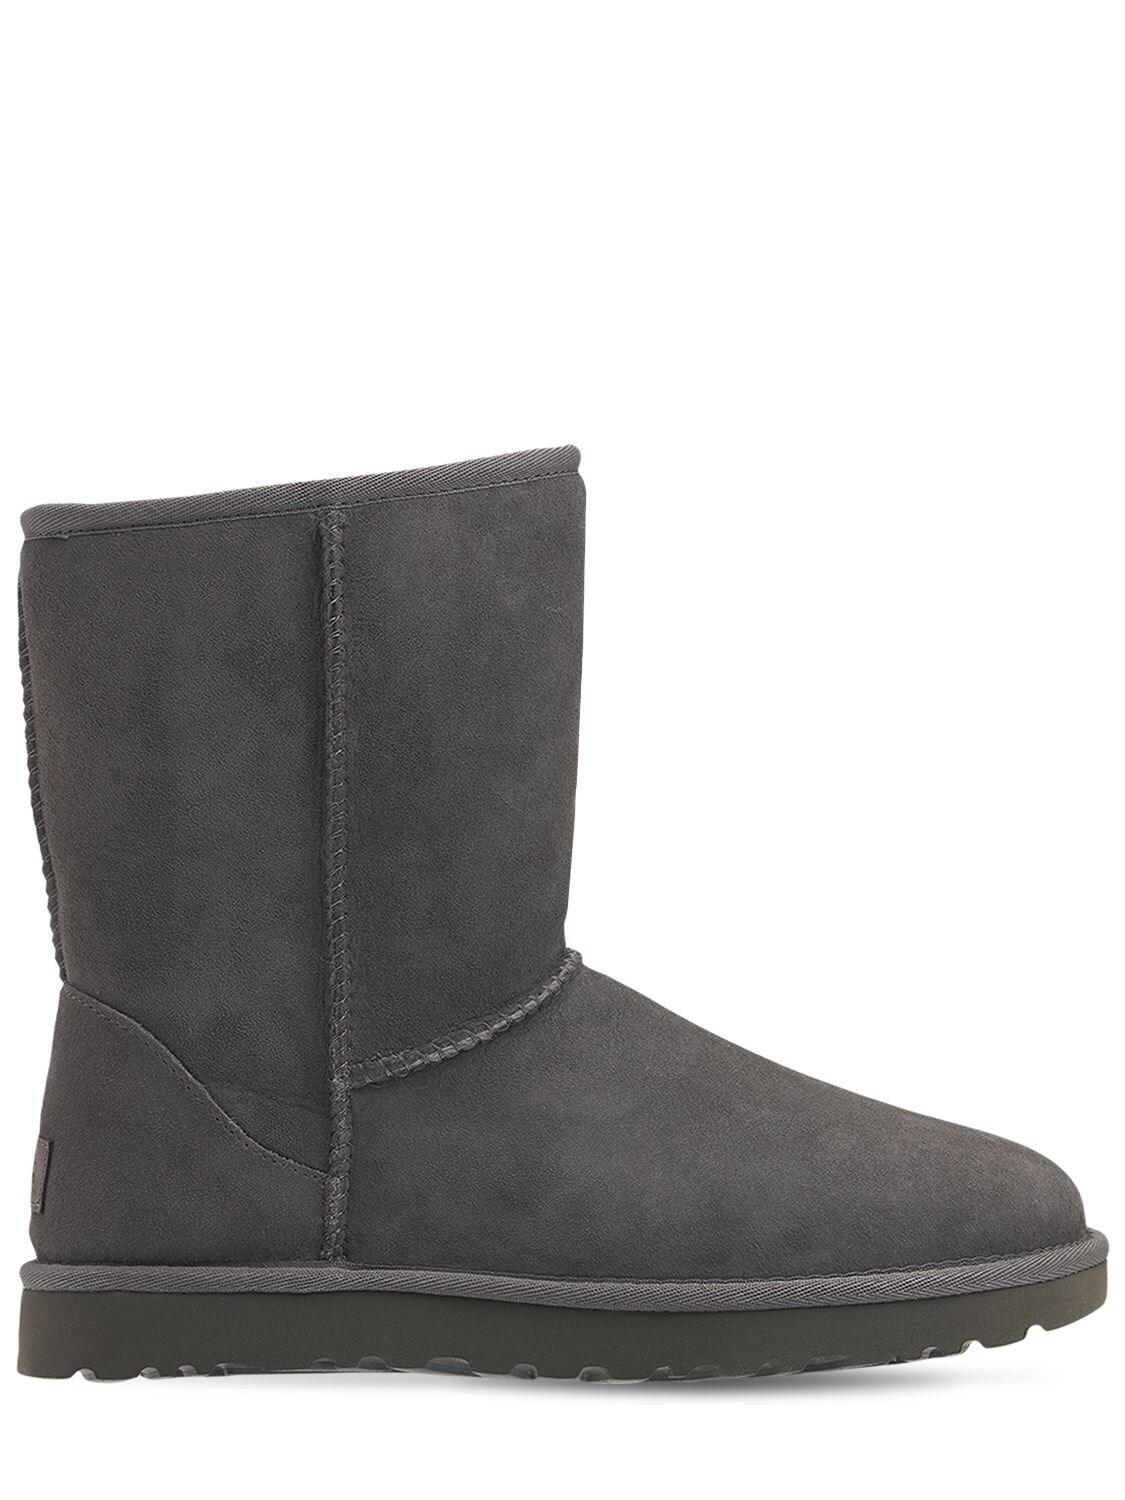 UGG Suede 10mm Classic Short Ii Shearling Boots in Grey (Black) - Save 21%  | Lyst